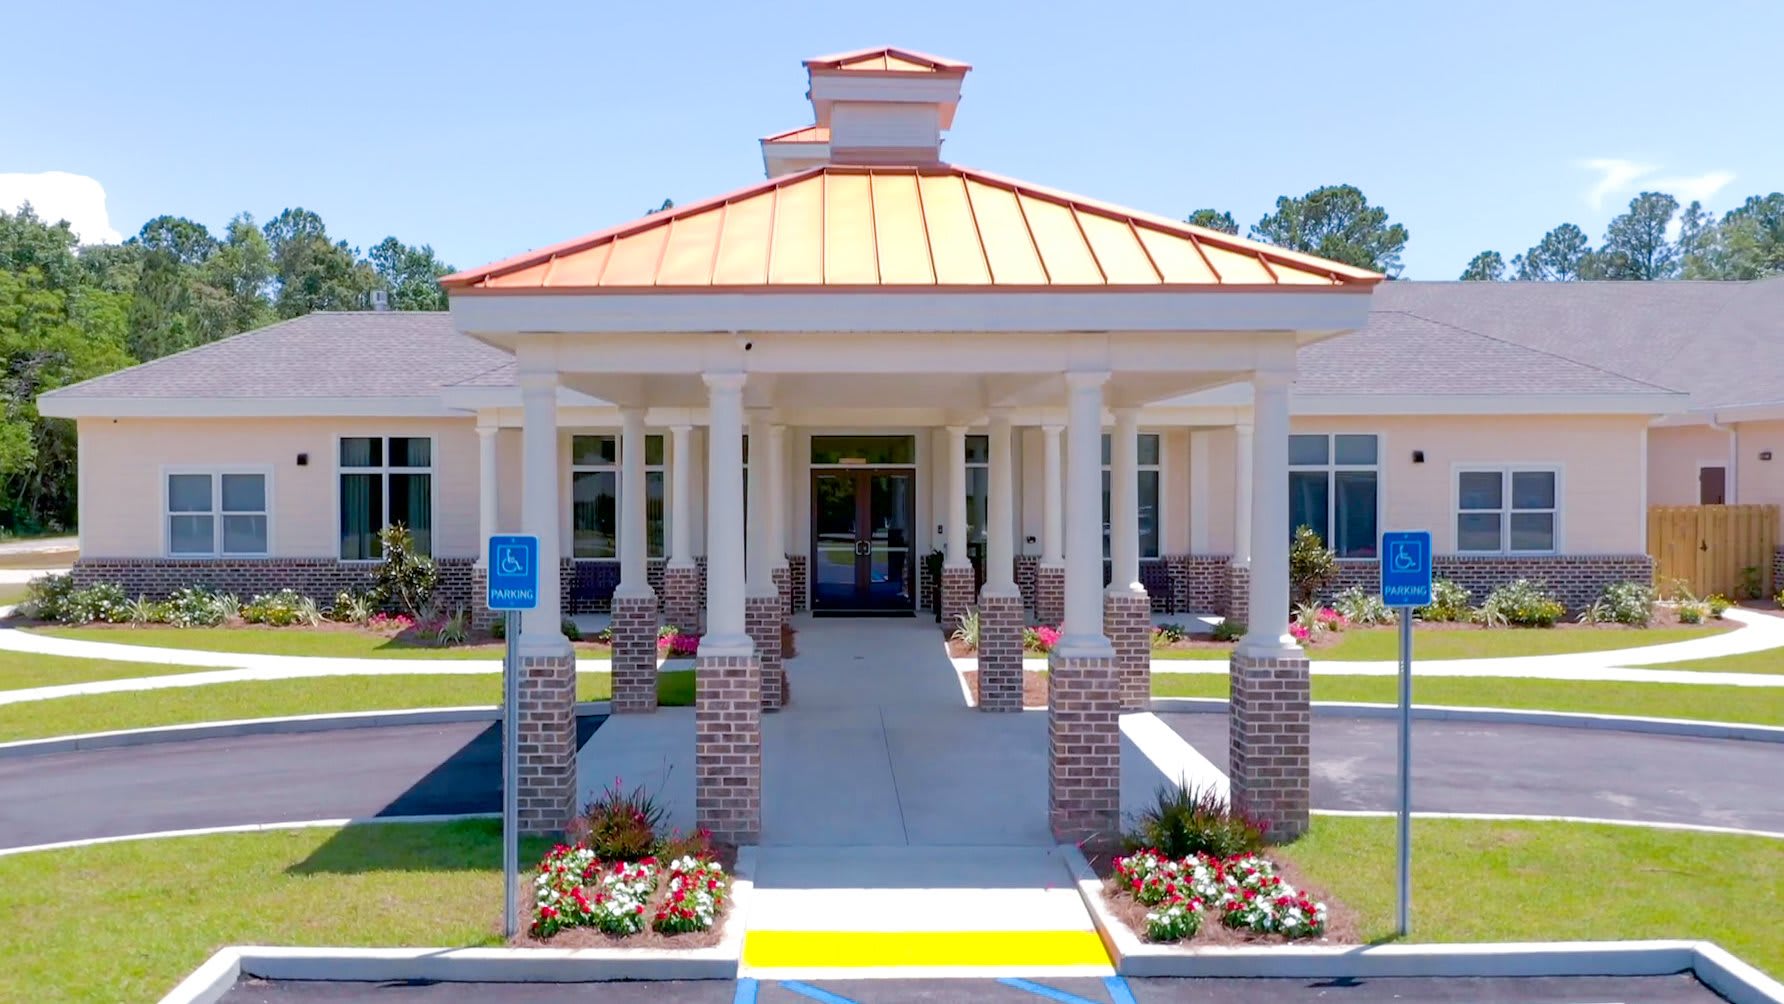 Photo of The Homestead Assisted Living Inc